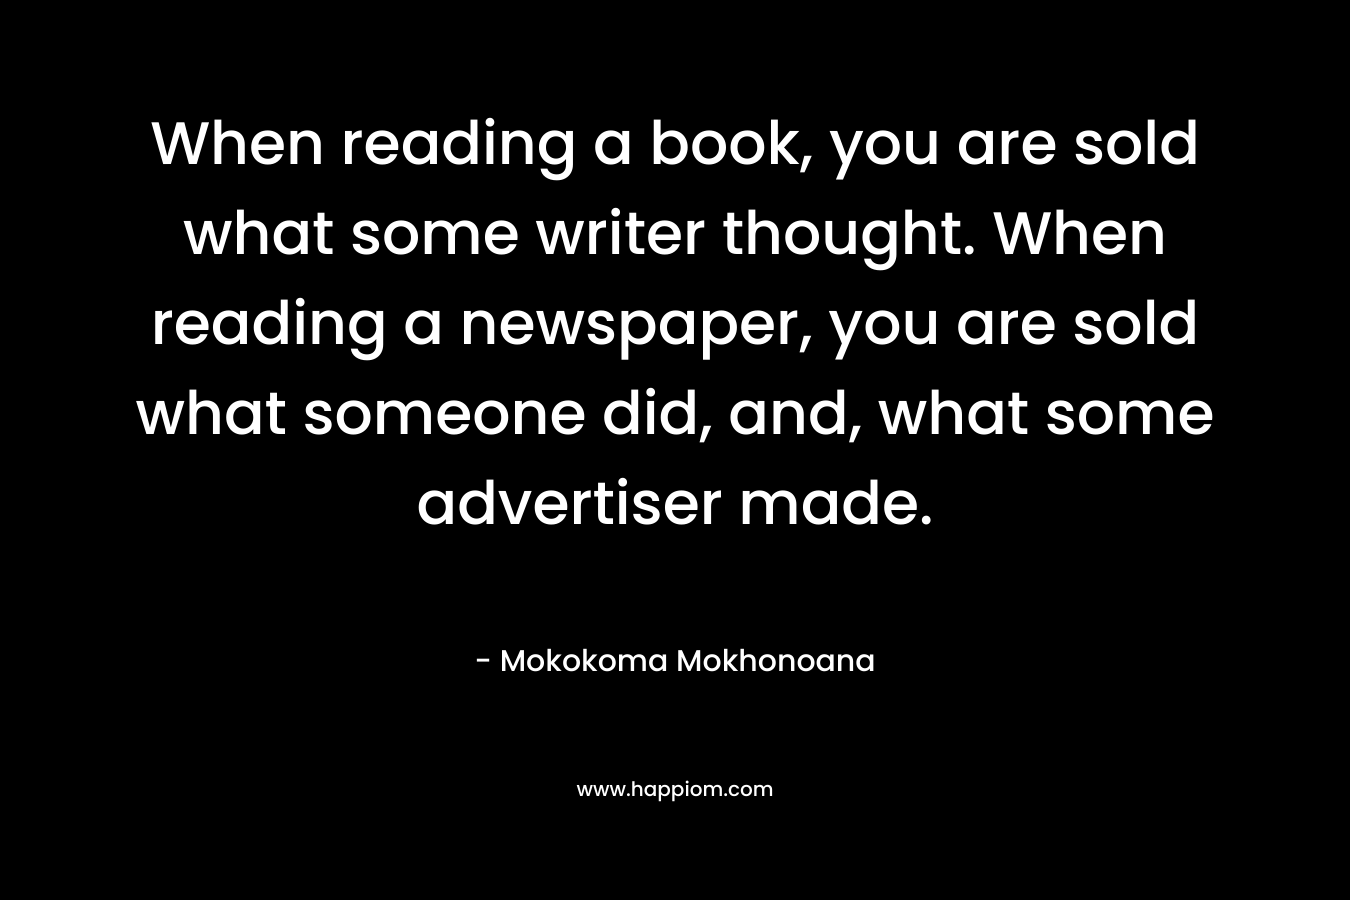 When reading a book, you are sold what some writer thought. When reading a newspaper, you are sold what someone did, and, what some advertiser made. – Mokokoma Mokhonoana